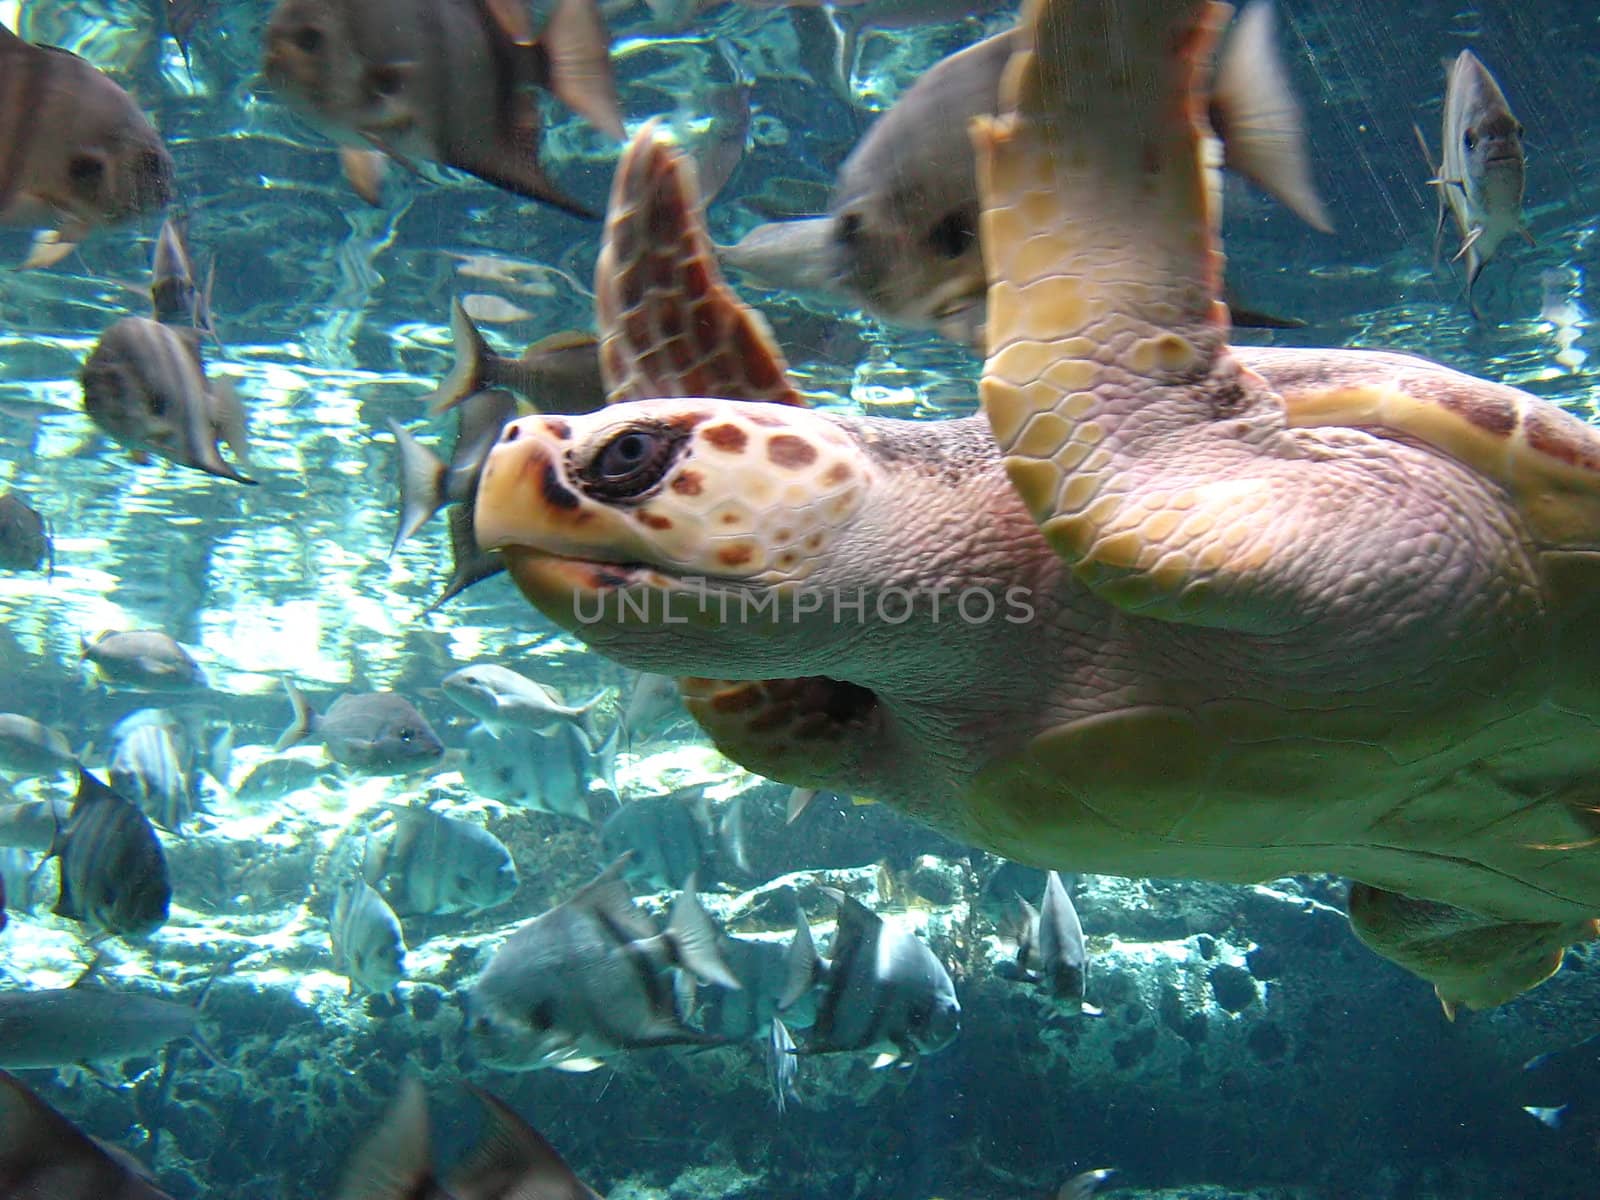 A photograph of a sea turtle in swimming in the ocean.